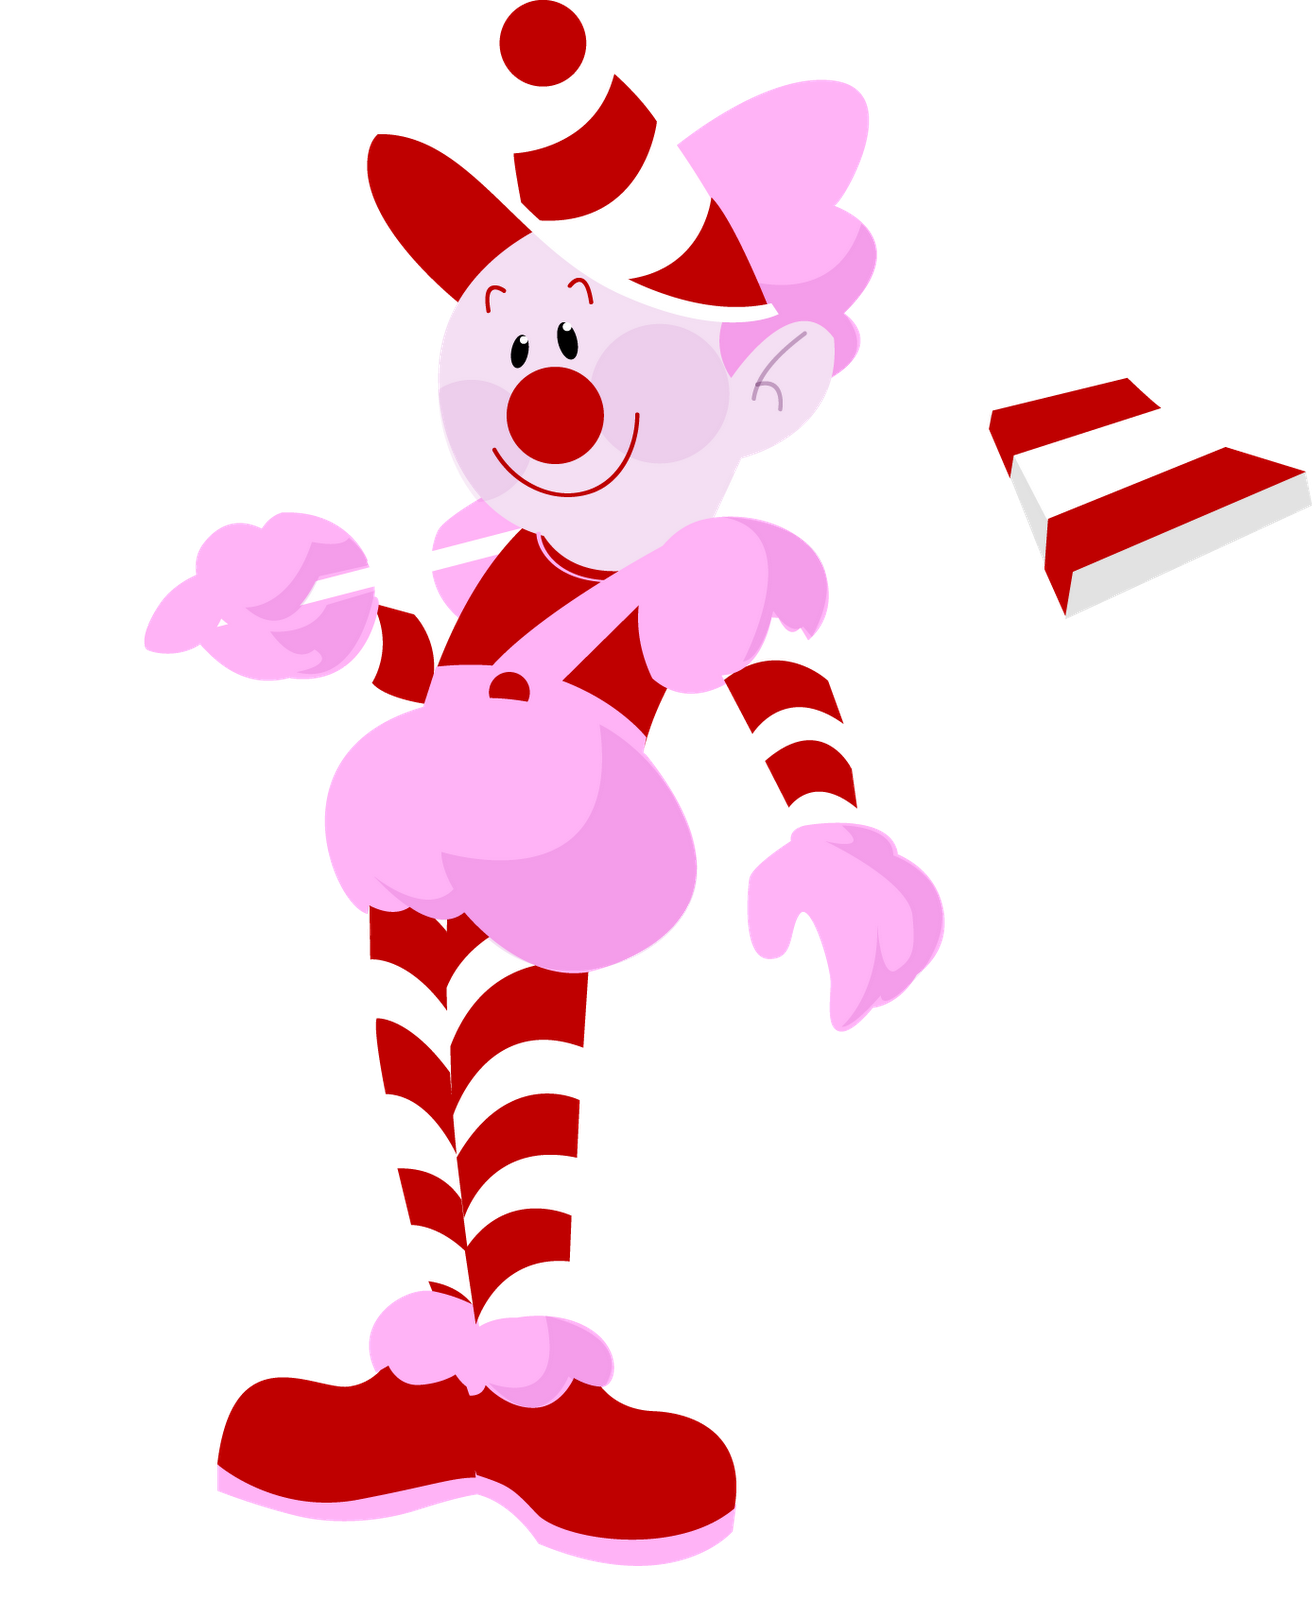 Candyland clipart animated. Image of candy land